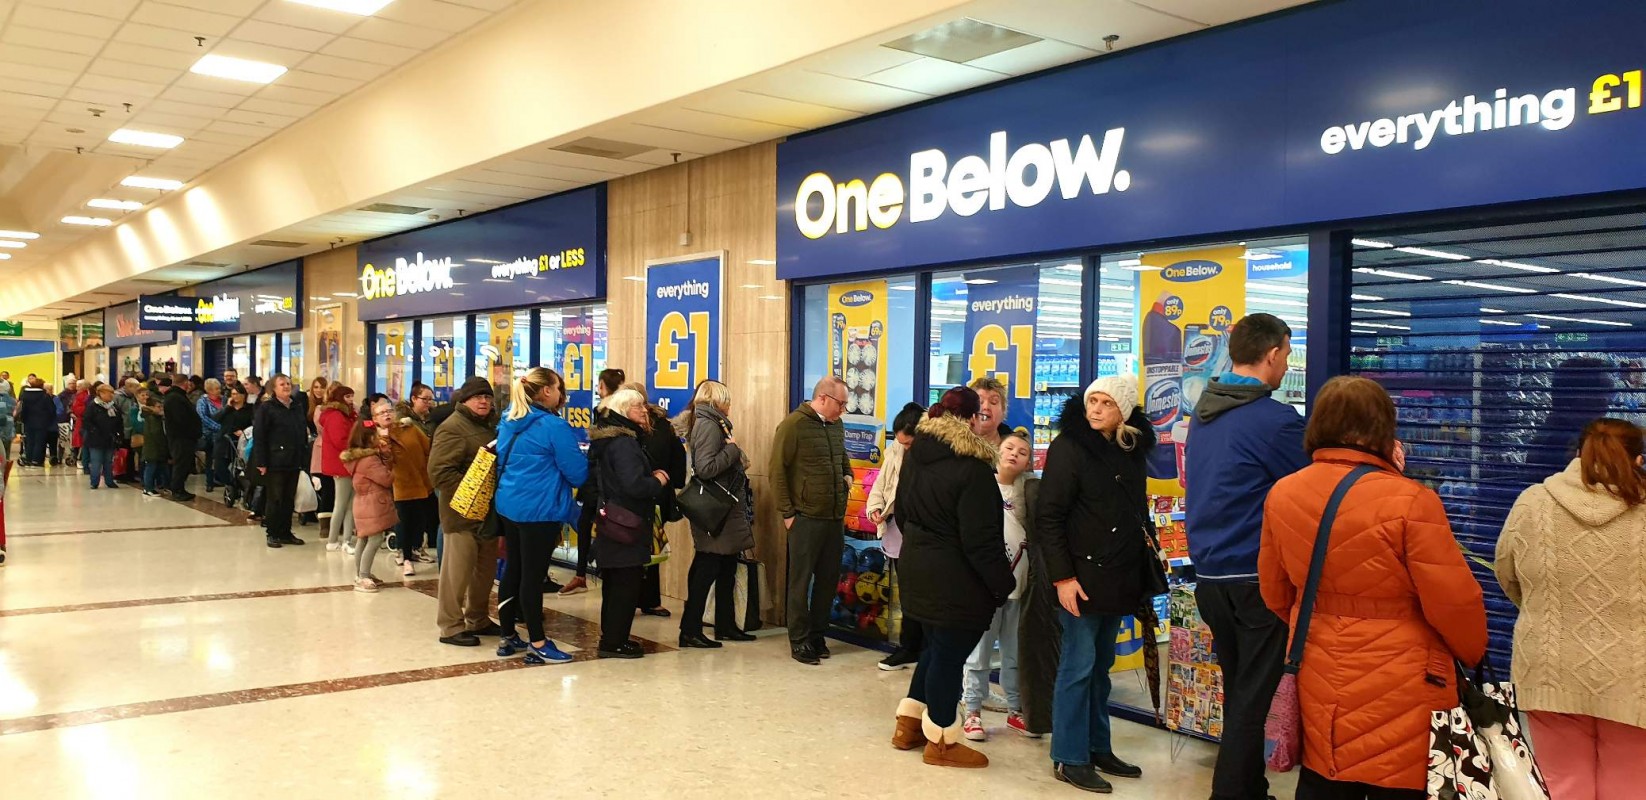 New Image for SHOPPERS QUEUE AS NEW DISCOUNT RETAILER ONE BELOW OPENS AT THE HARDSHAW CENTRE